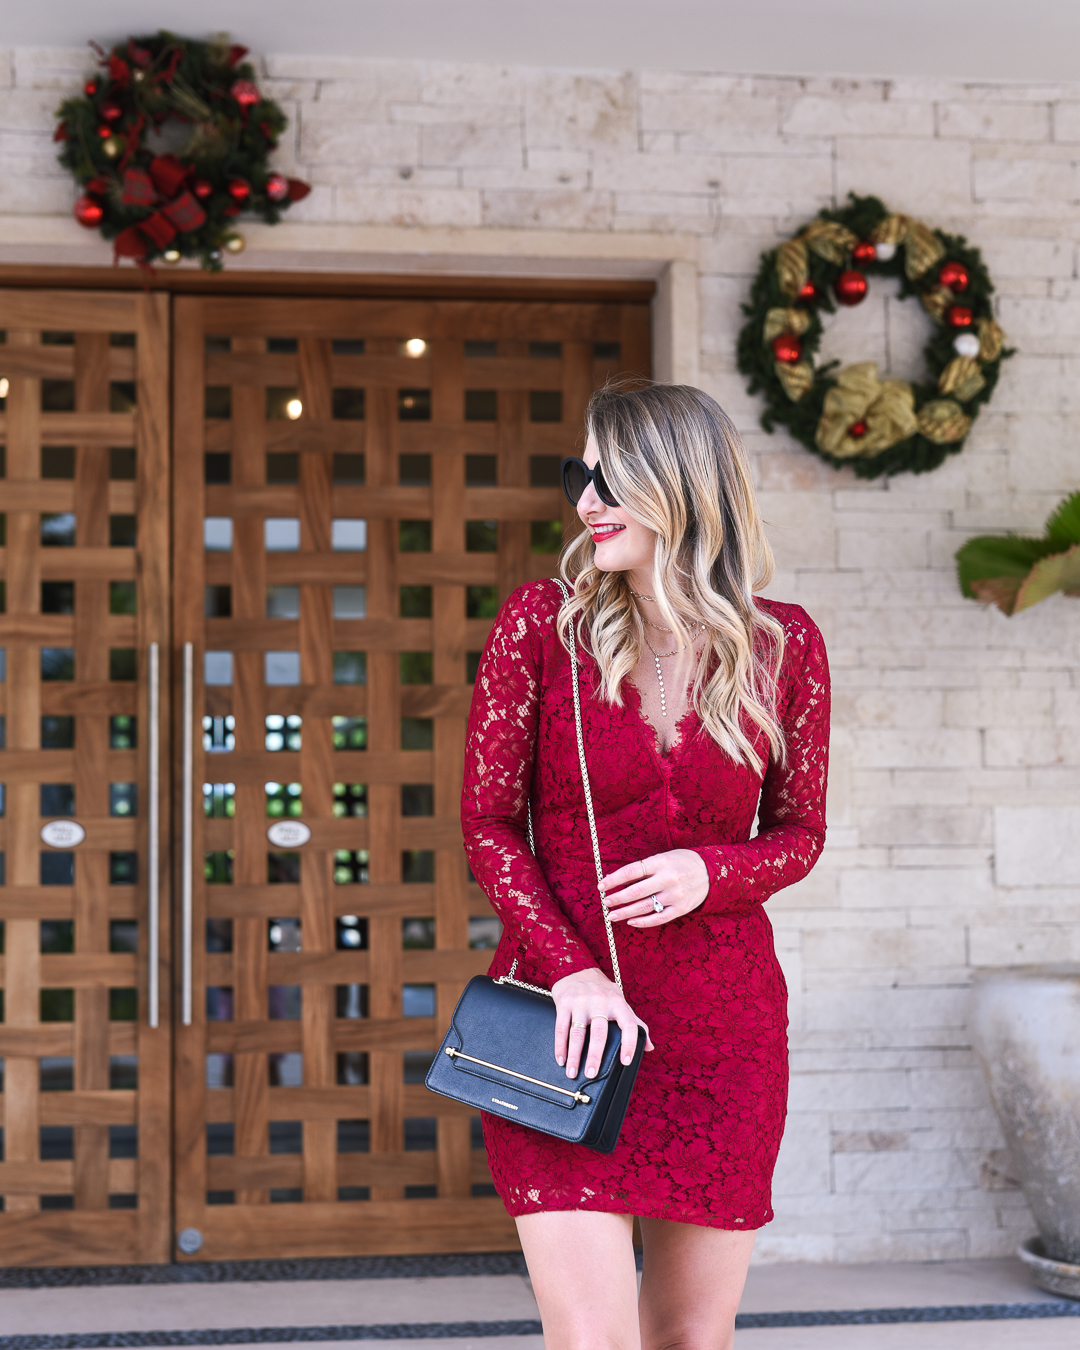 how to wear lace and leather - Red WAYF Dress by Chicago fashion blogger Visions of Vogue